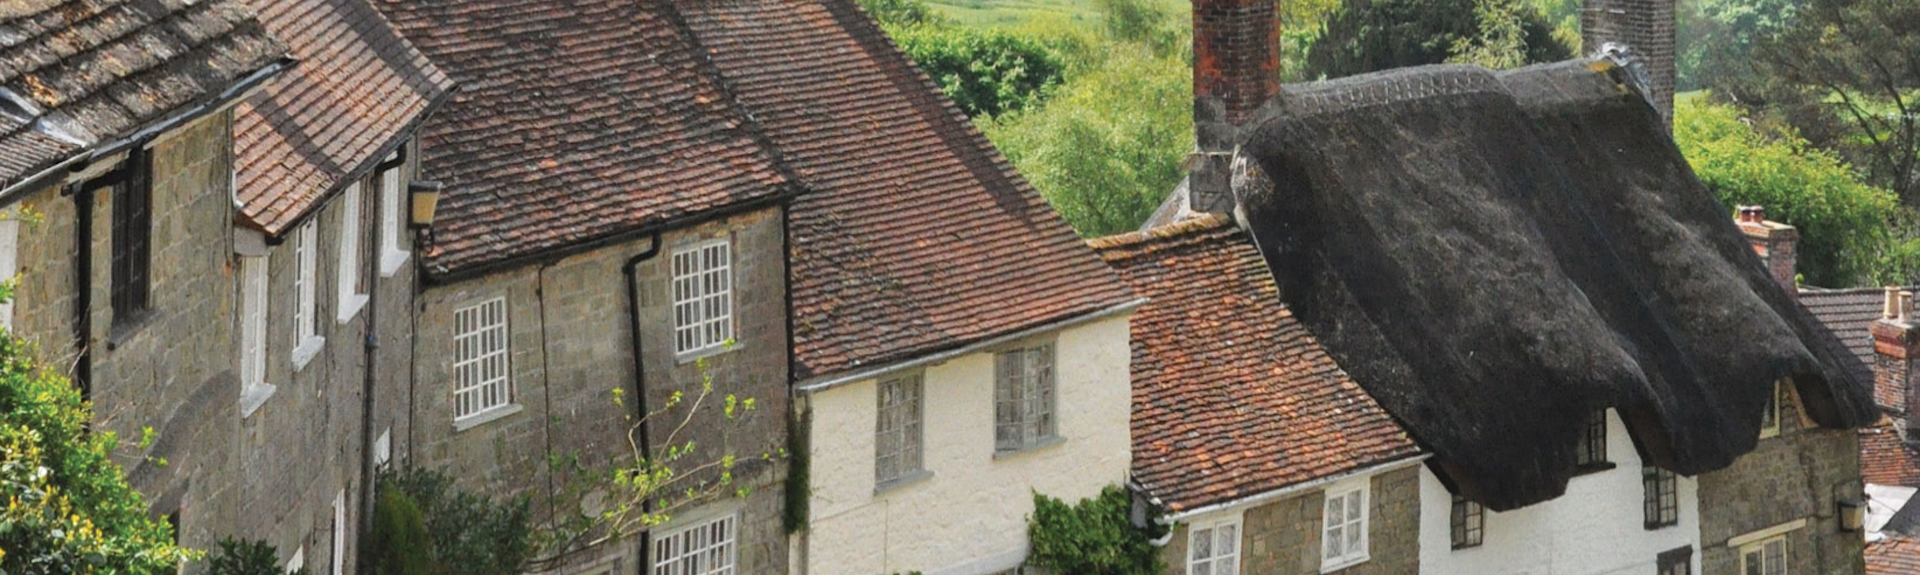 A terrace of traditional village cottages on the steep Gold Hill in Shaftesbury, Dorset